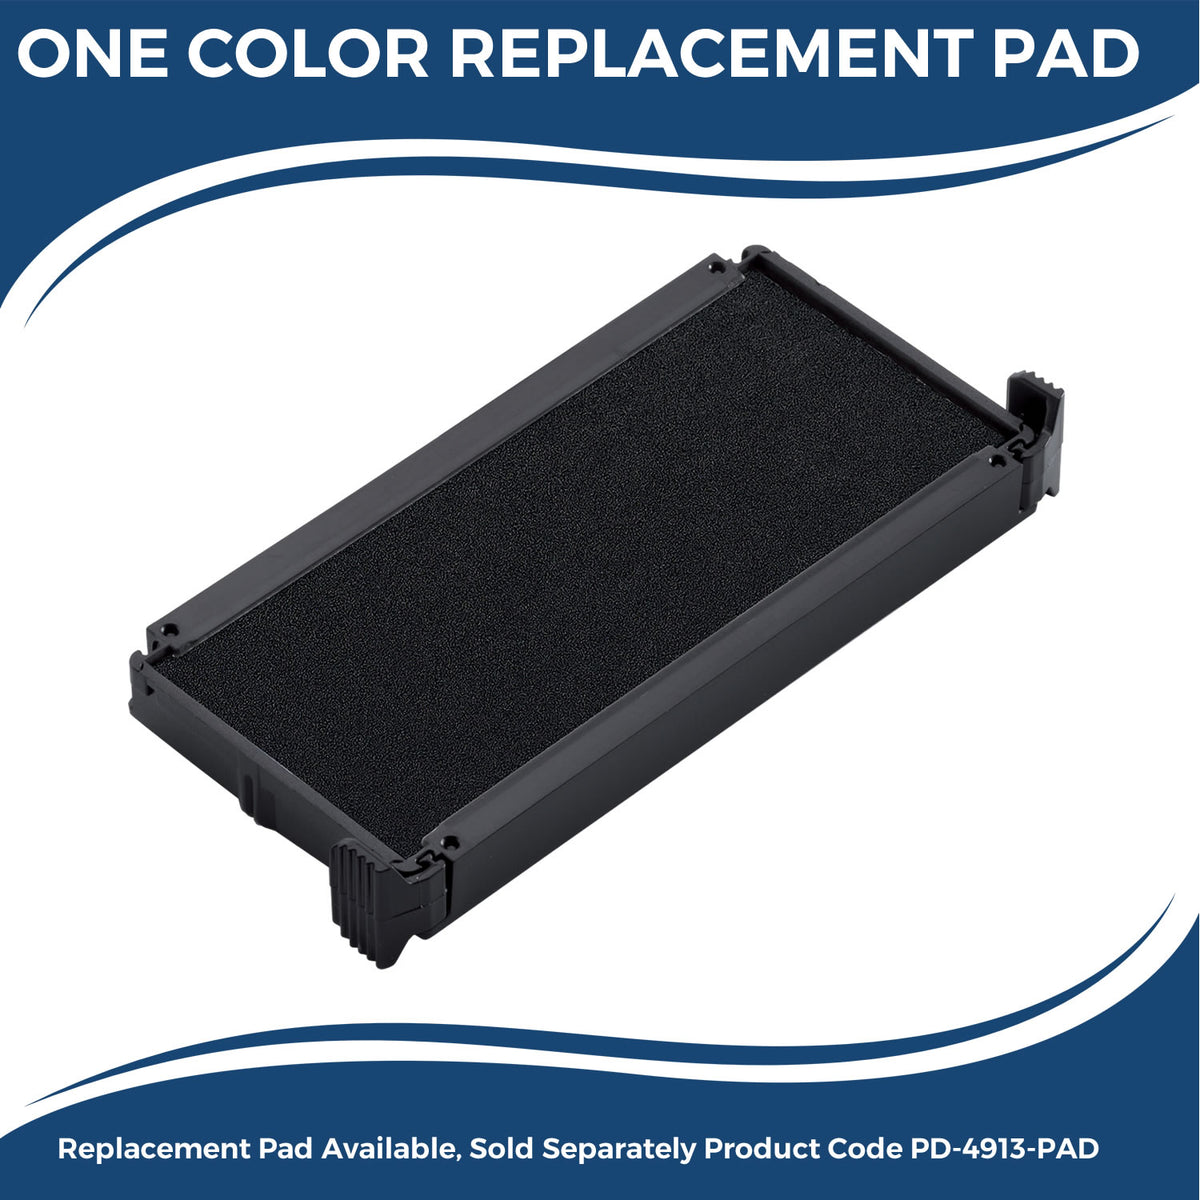 Large Self-Inking Allergies Stamp 4982S Large Replacment Pad